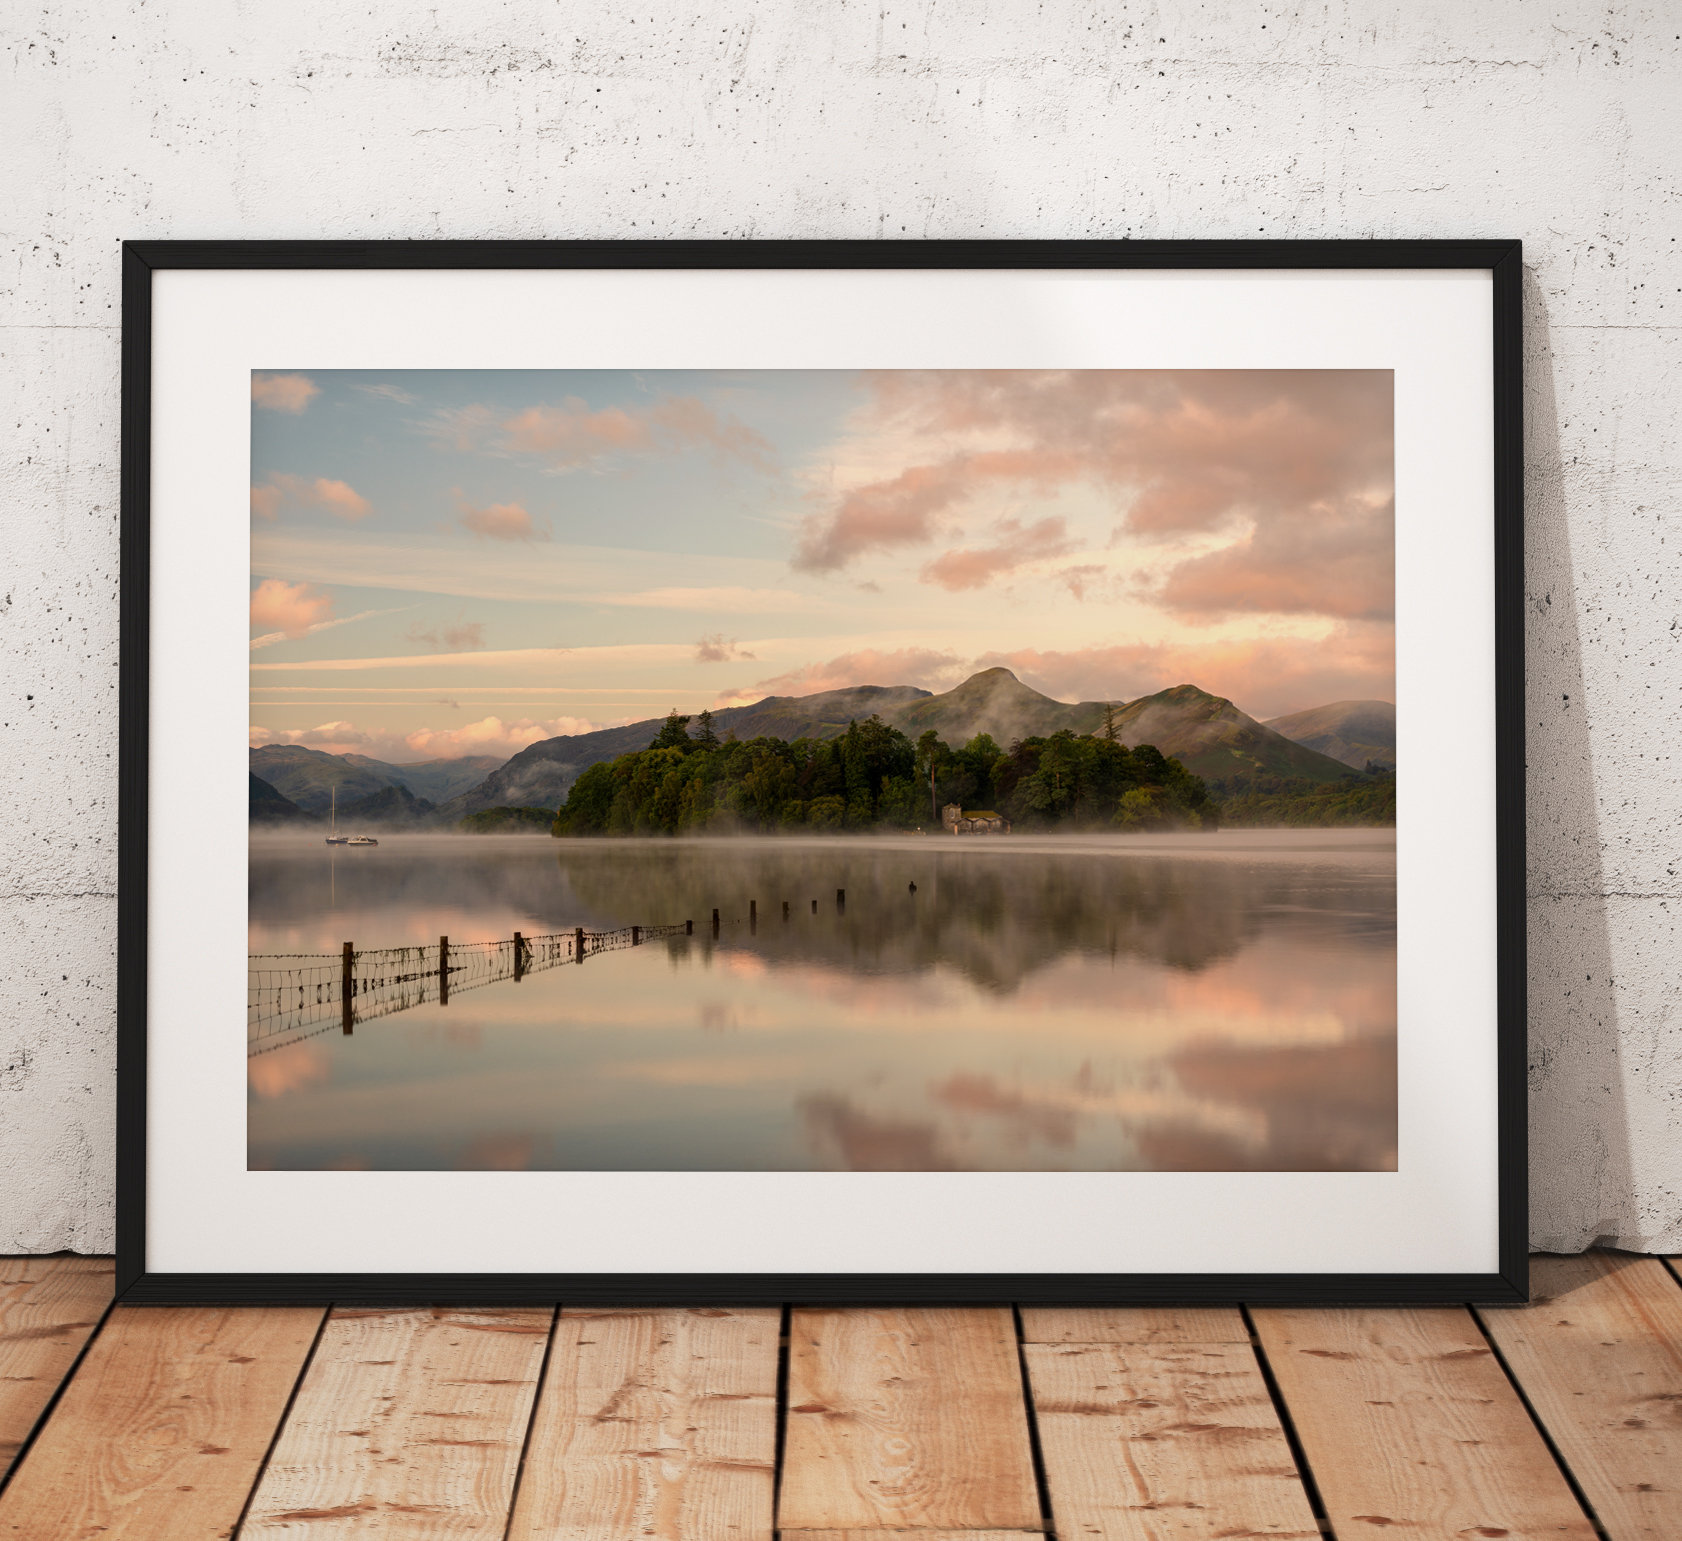 Northern Wild Landscape Photography - Lake District Photography showing a misty sunrise over Derwentwater with Derwent Isle emerging from the mist. From Crow park in Keswick, UK